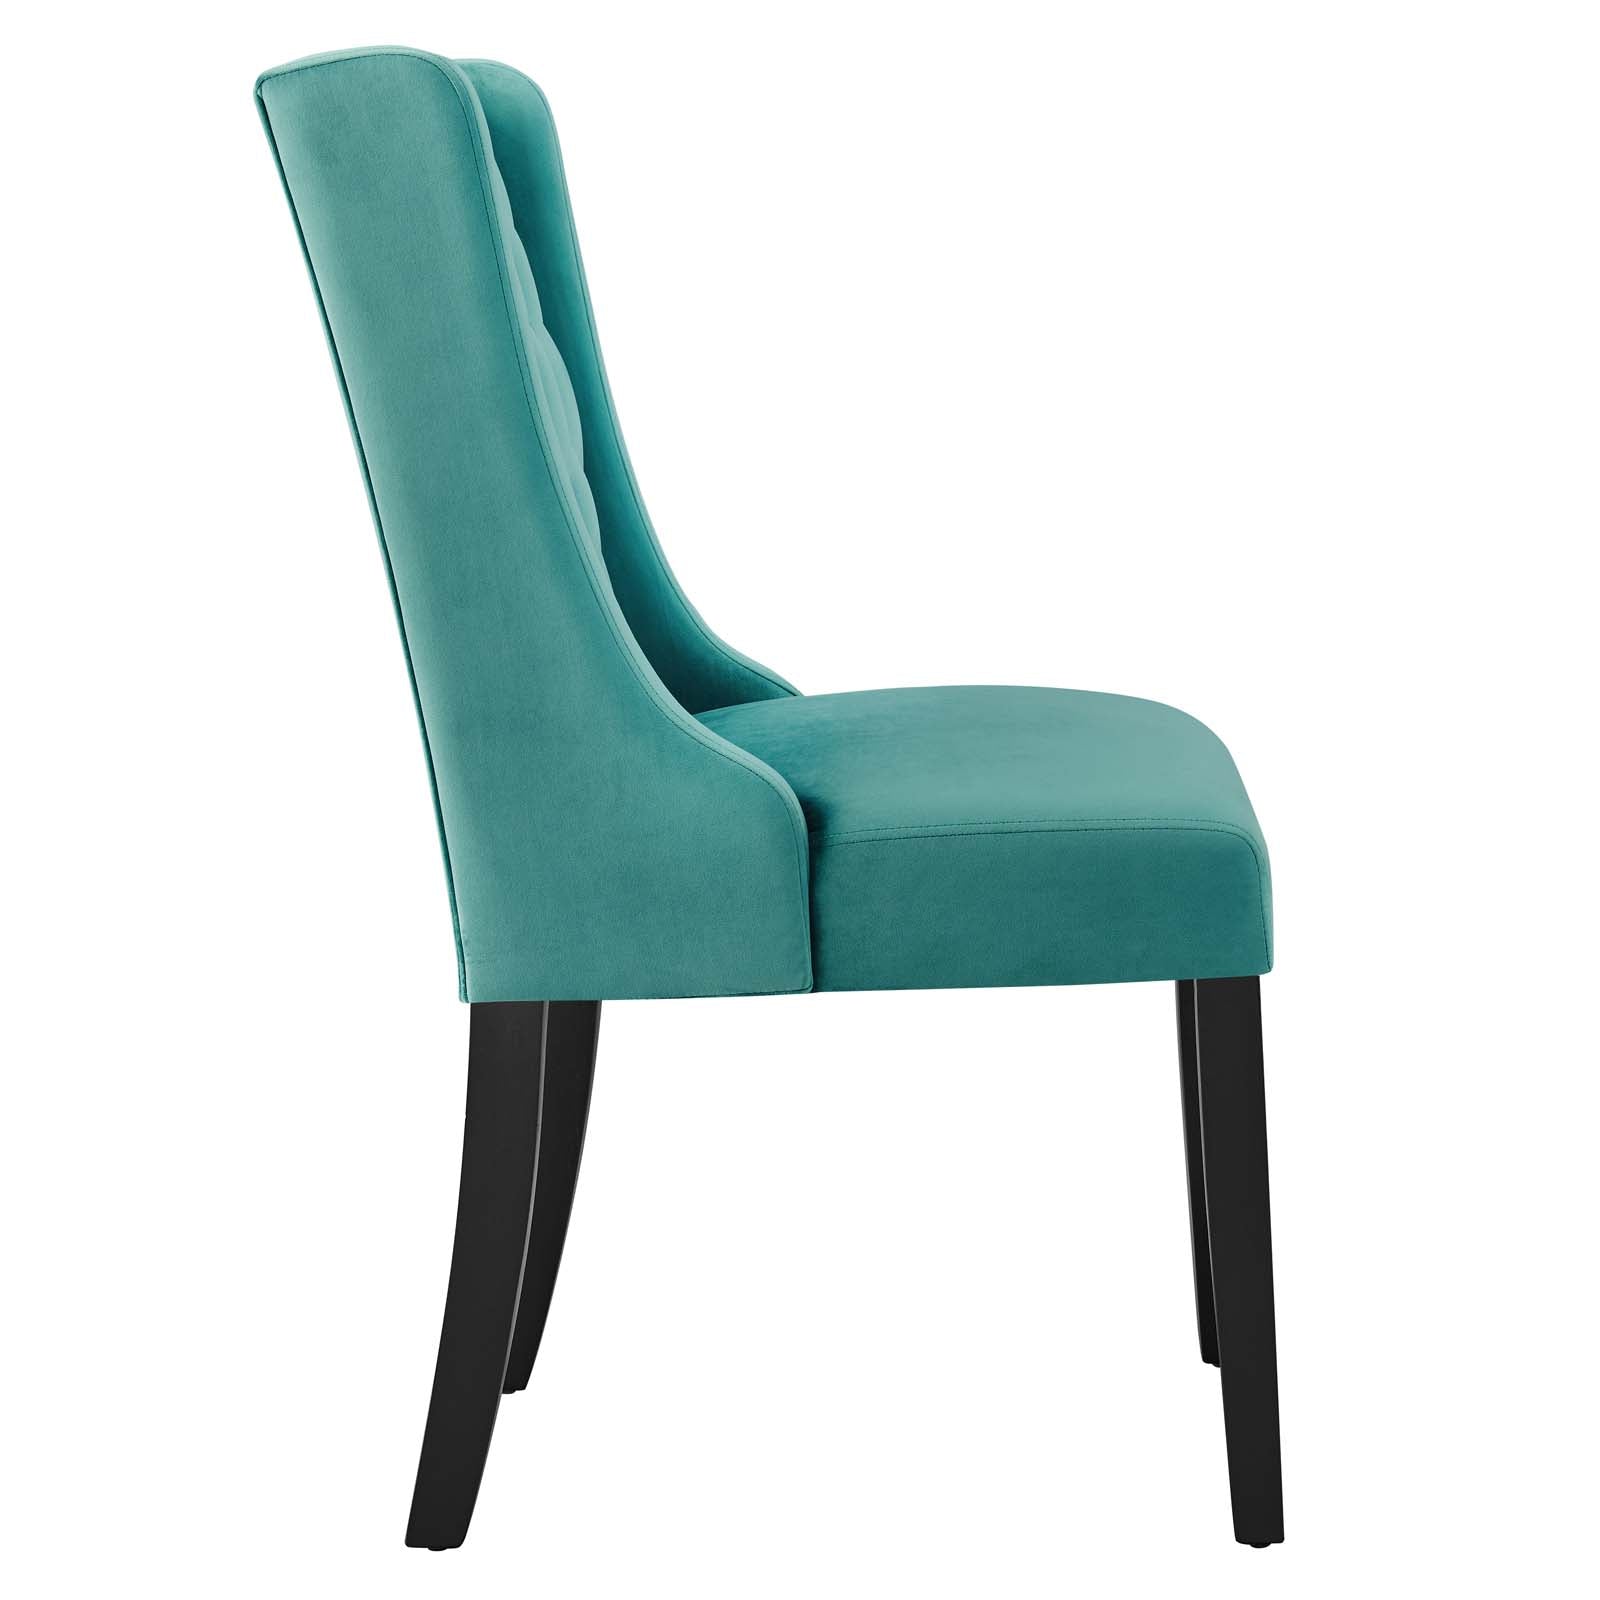 Modway Dining Chairs - Baronet Performance Velvet Dining Chairs - Set of 2 Teal